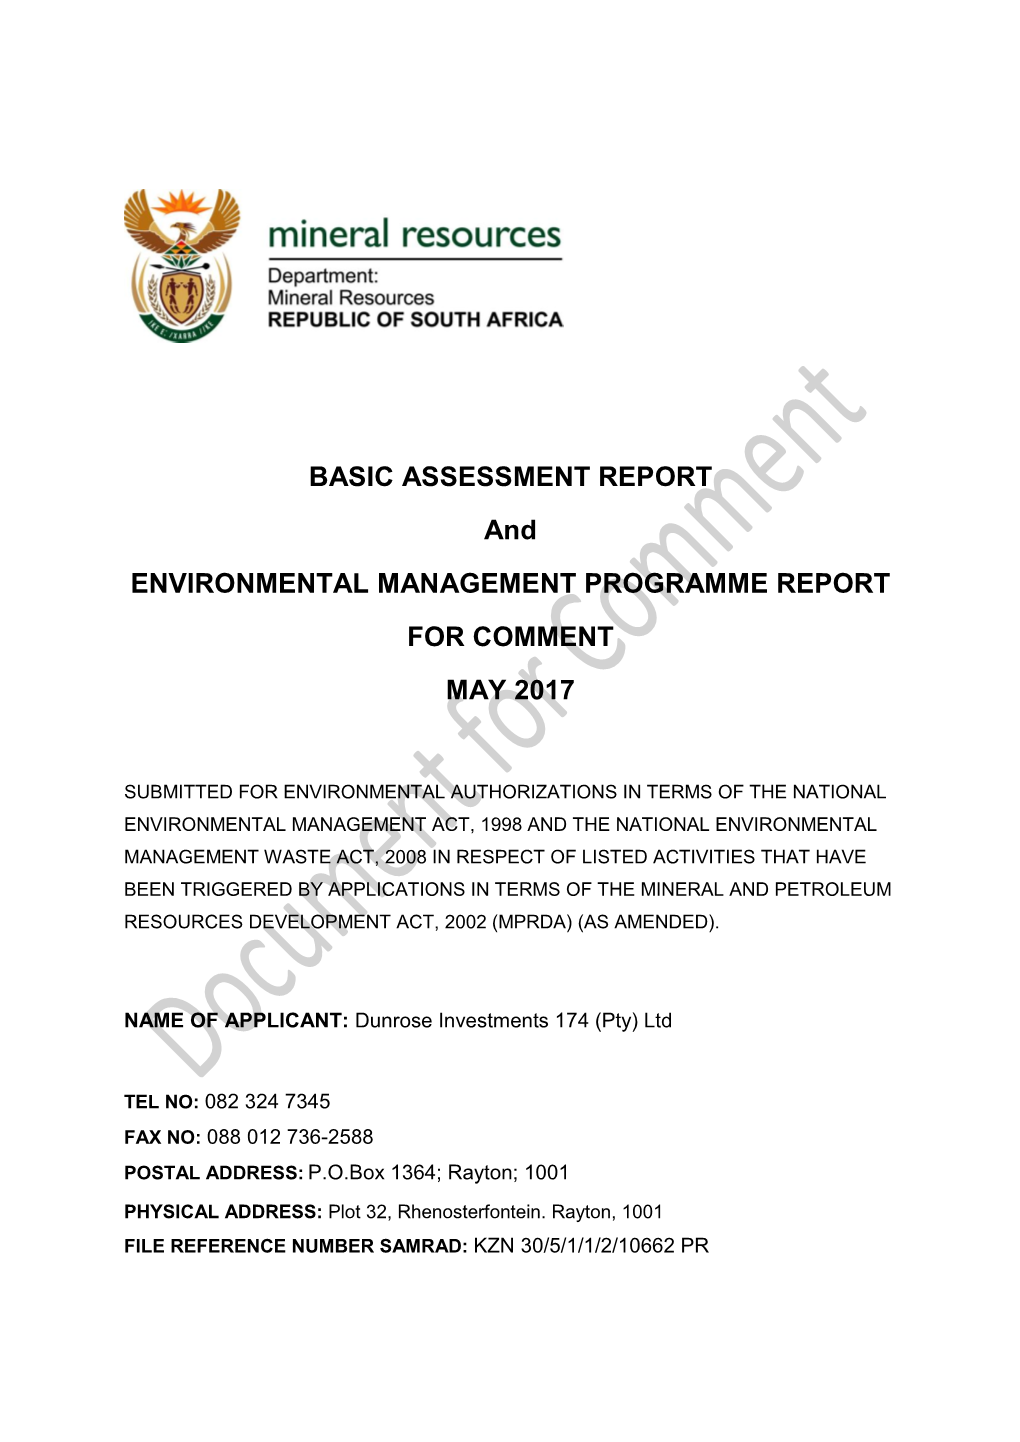 BASIC ASSESSMENT REPORT and ENVIRONMENTAL MANAGEMENT PROGRAMME REPORT for COMMENT MAY 2017